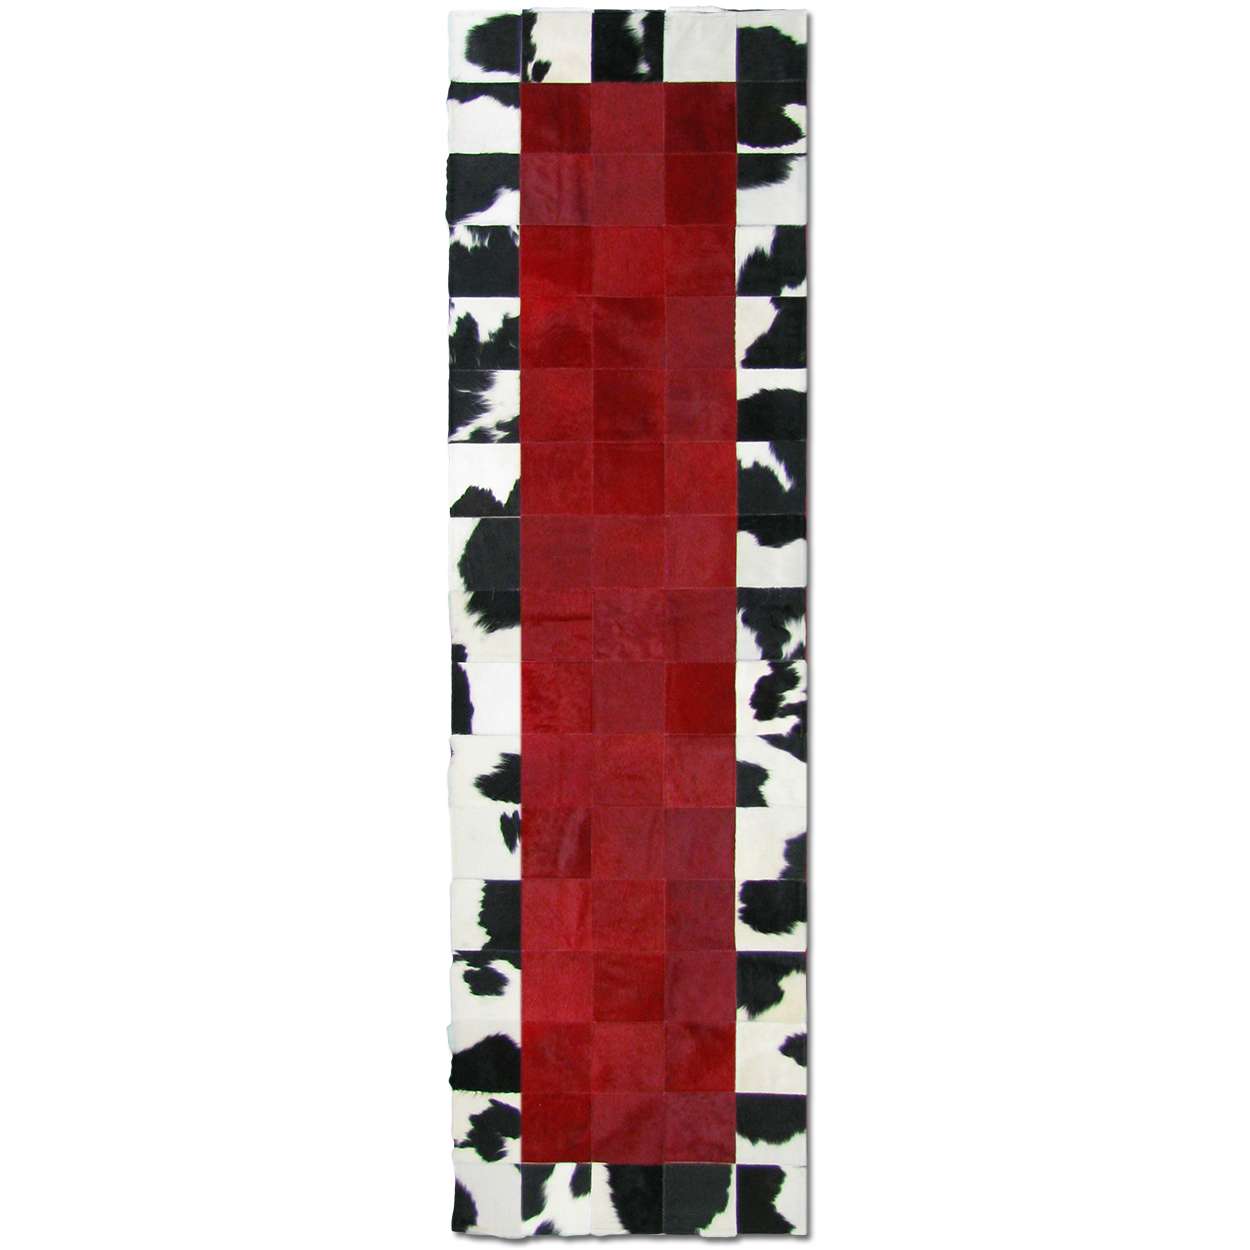 Custom Cowhide Patchwork Runner - 6in Squares - Solid Color Framed in Black and White